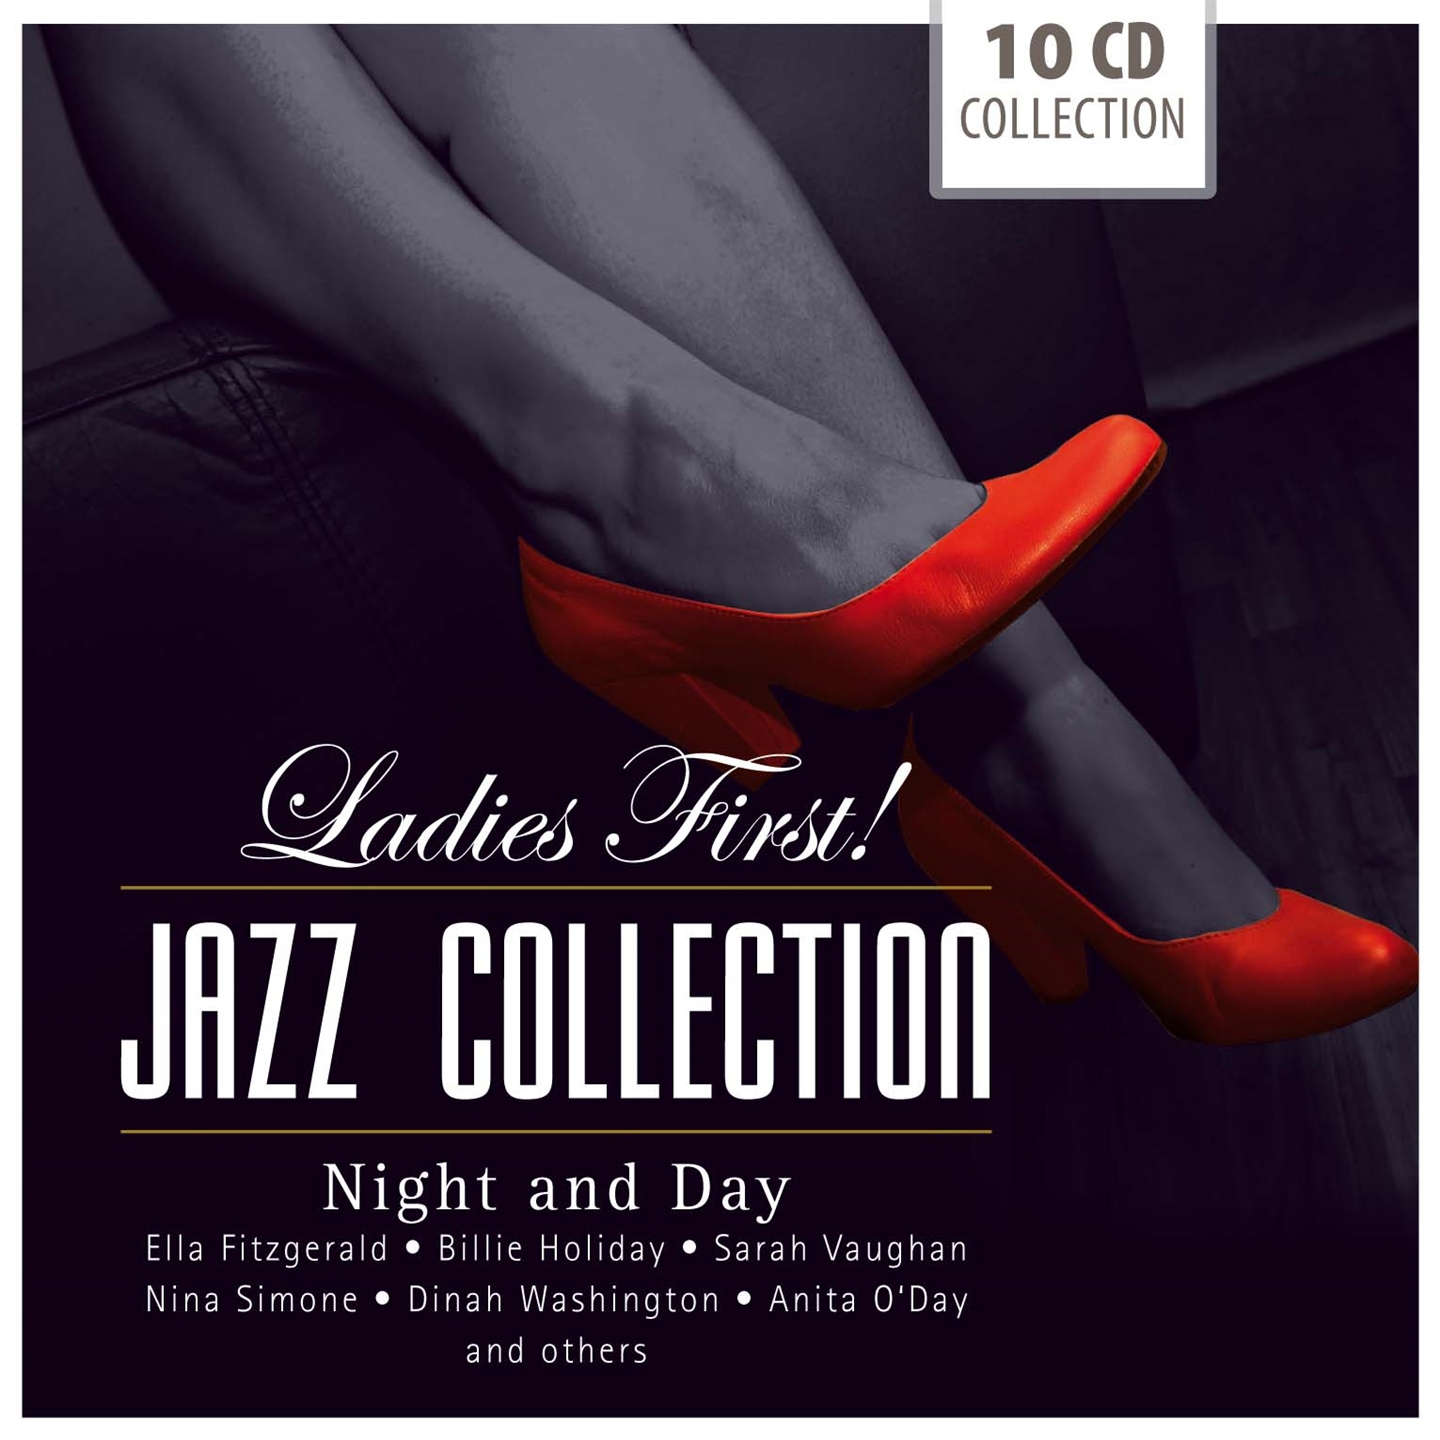 LADIES FIRST! JAZZ COLLECTION